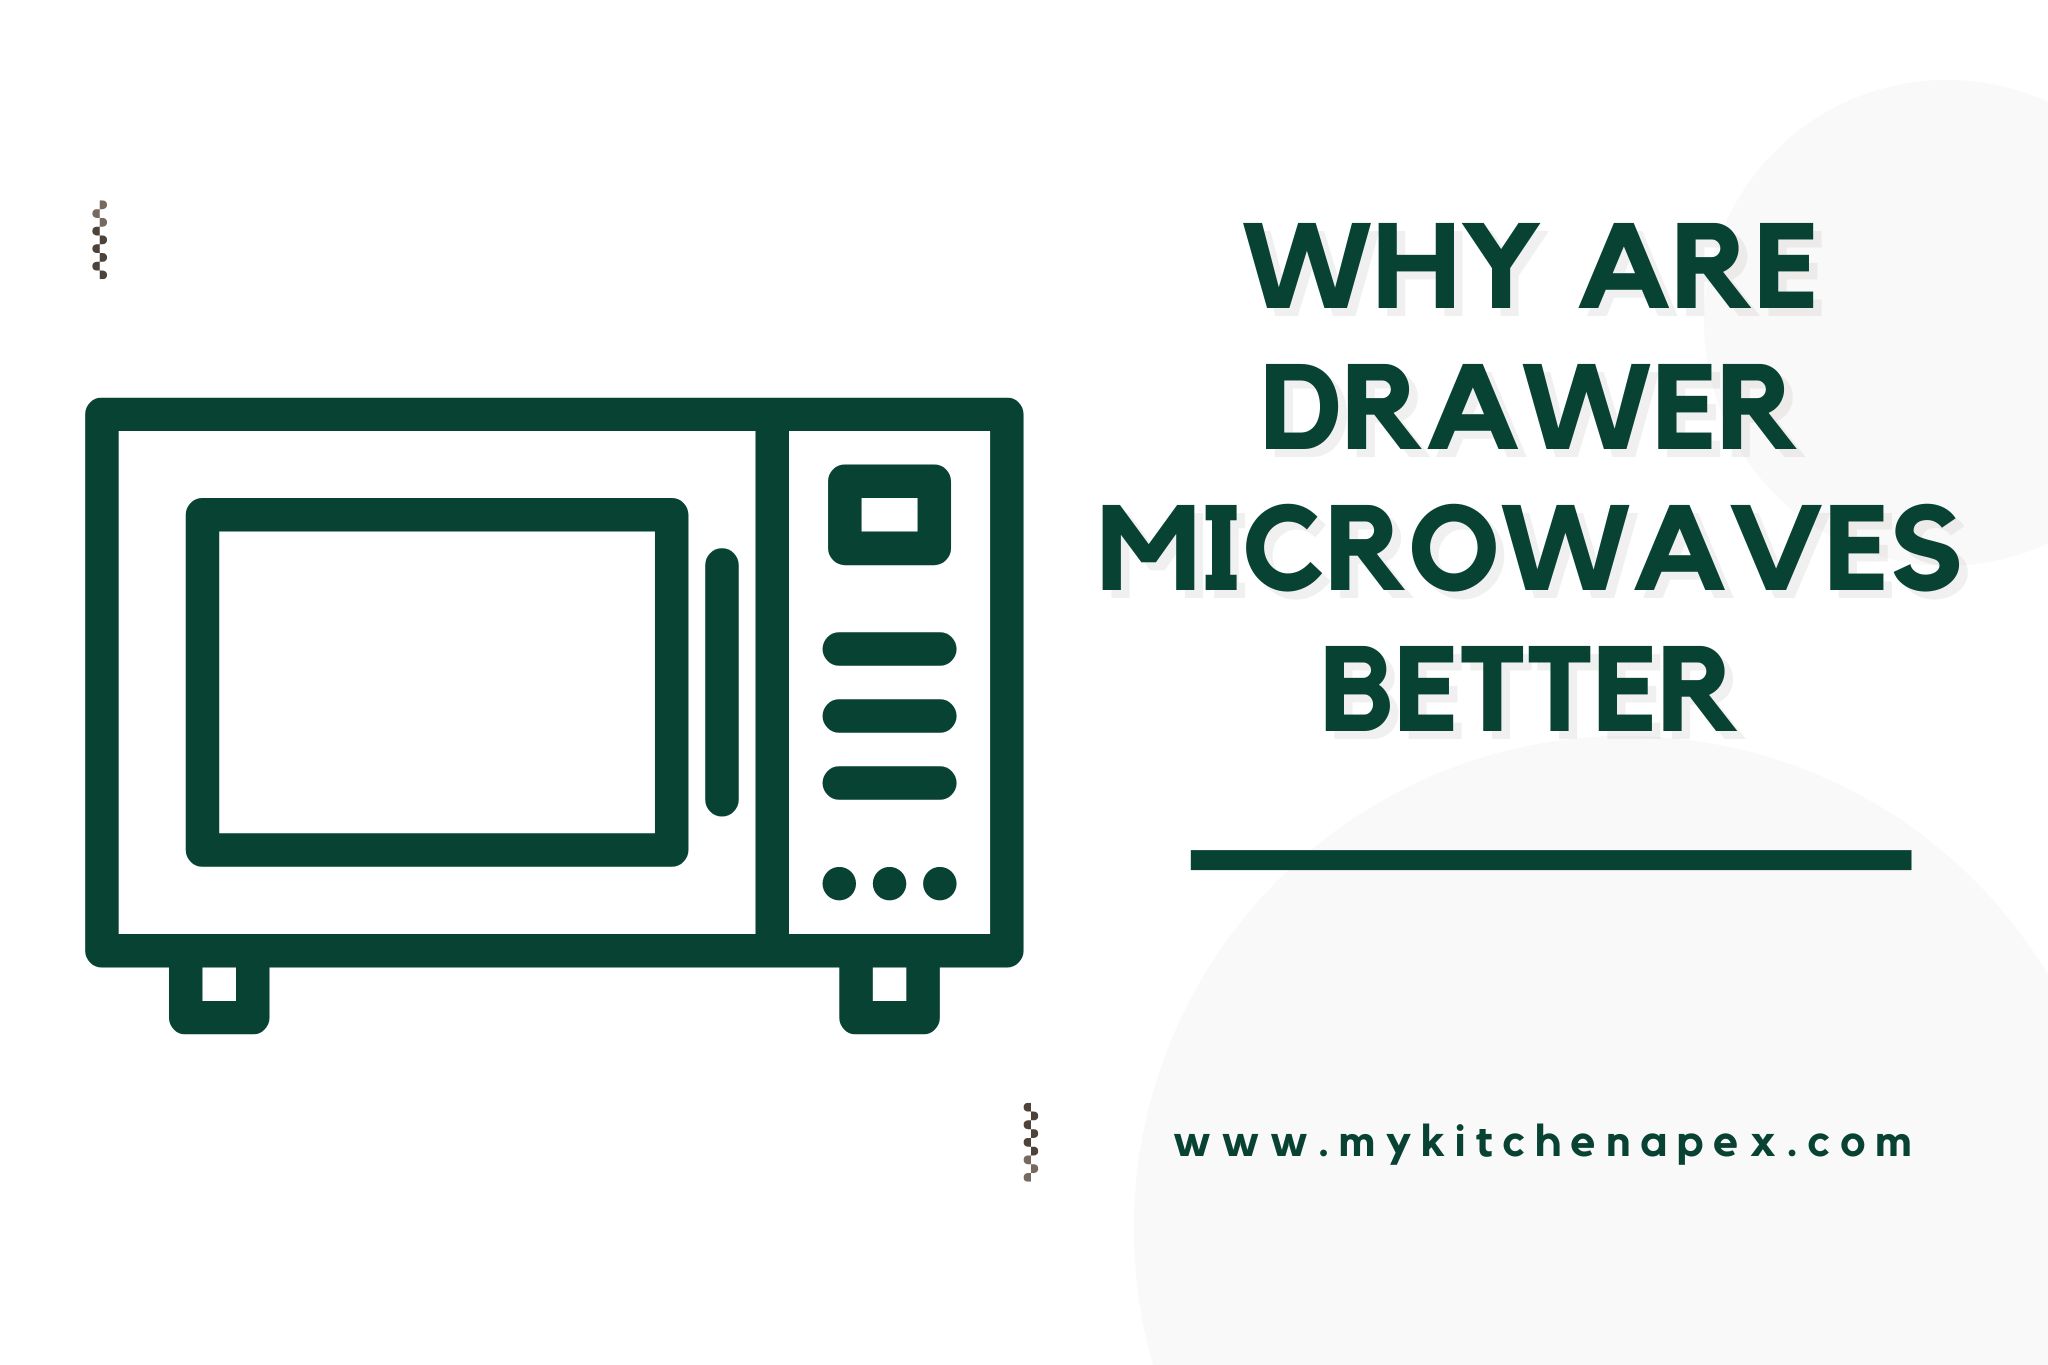 why are drawer microwaves better